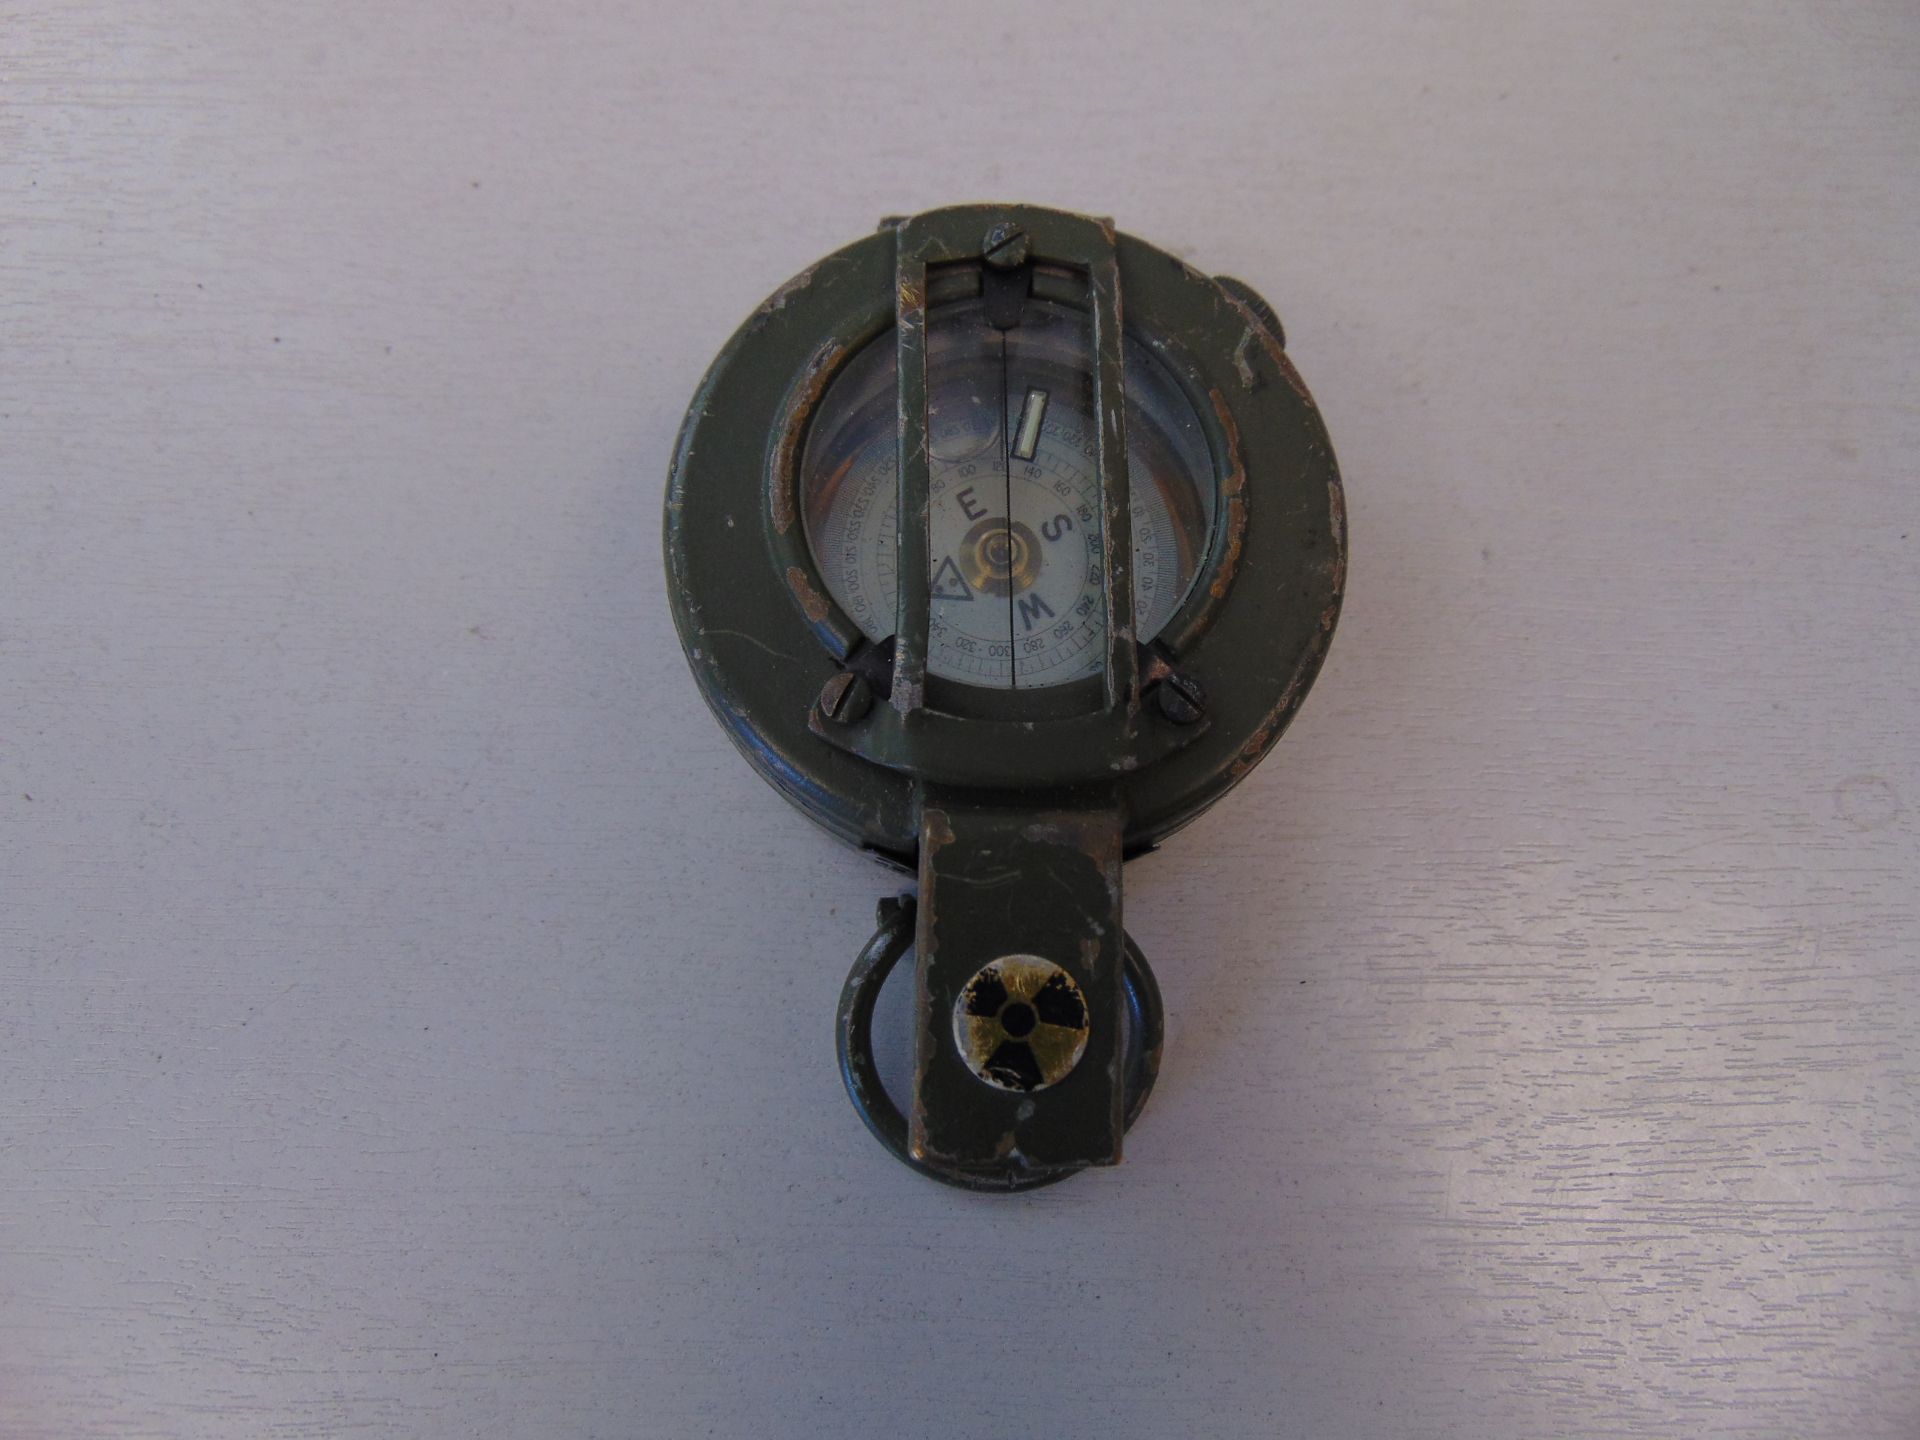 STANLEY LONDON BRITISH ARMY ISSUE BRASS COMPASS IN MILS NATO MARKS - Image 3 of 4